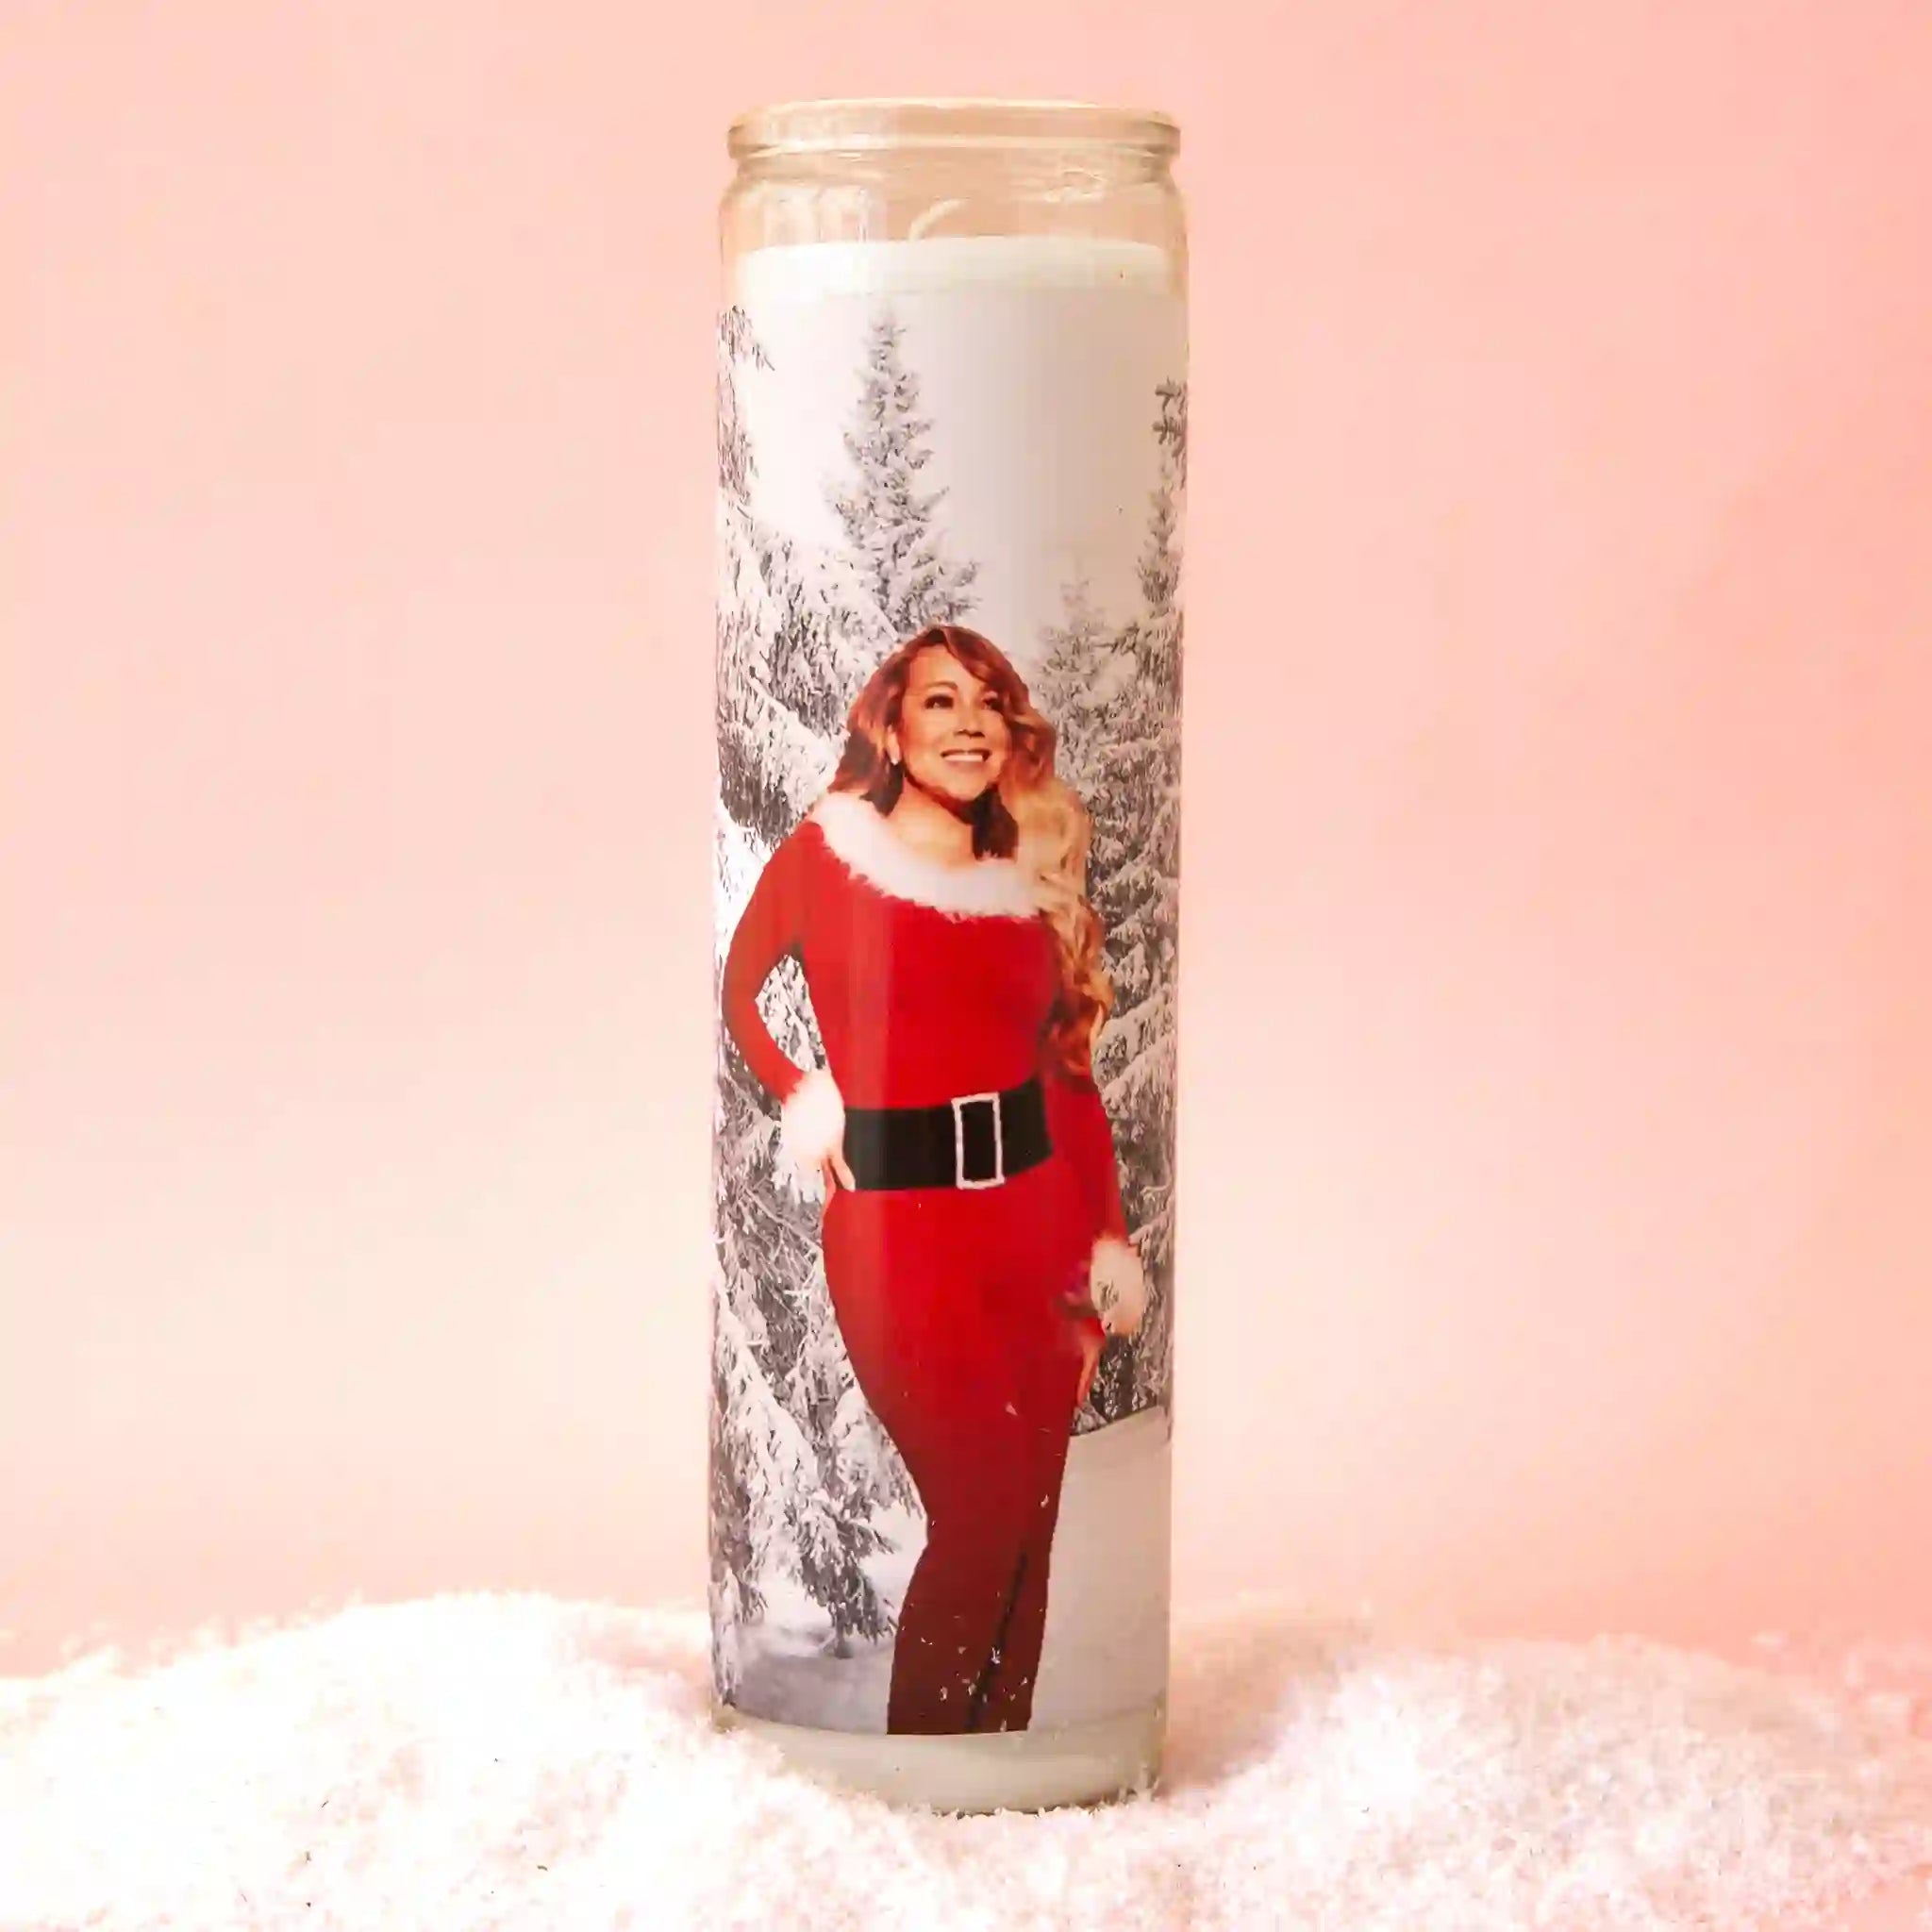 On a pink background is a thin prayer candle with a photo of Mariah Carey in a red Christmas outfit. 